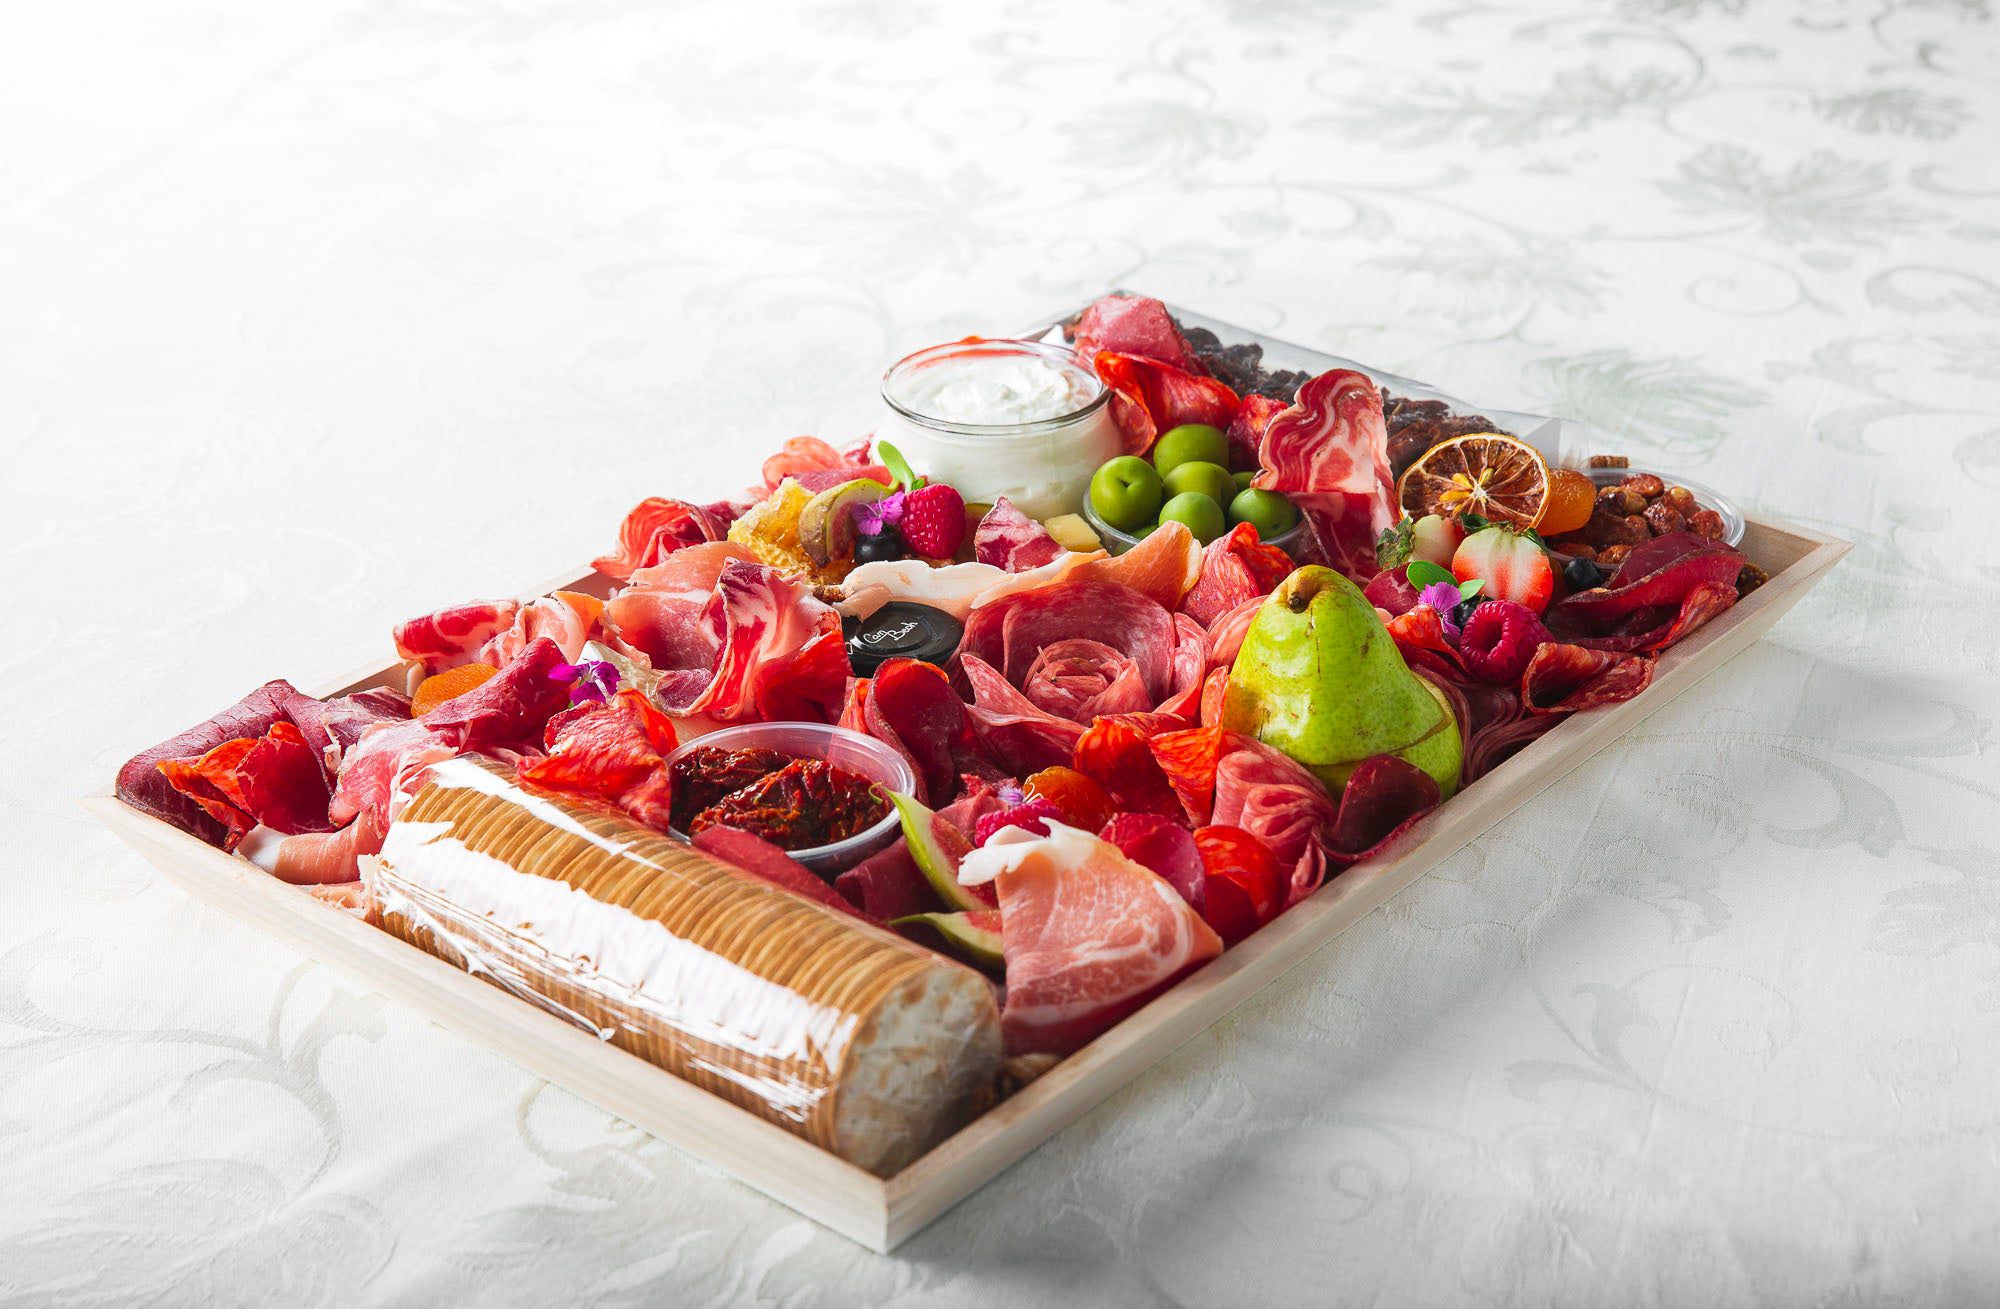 Best Small Meat Lover Charcuterie Board (Serves 10-15) Toronto Ontario The Graze Anatomy